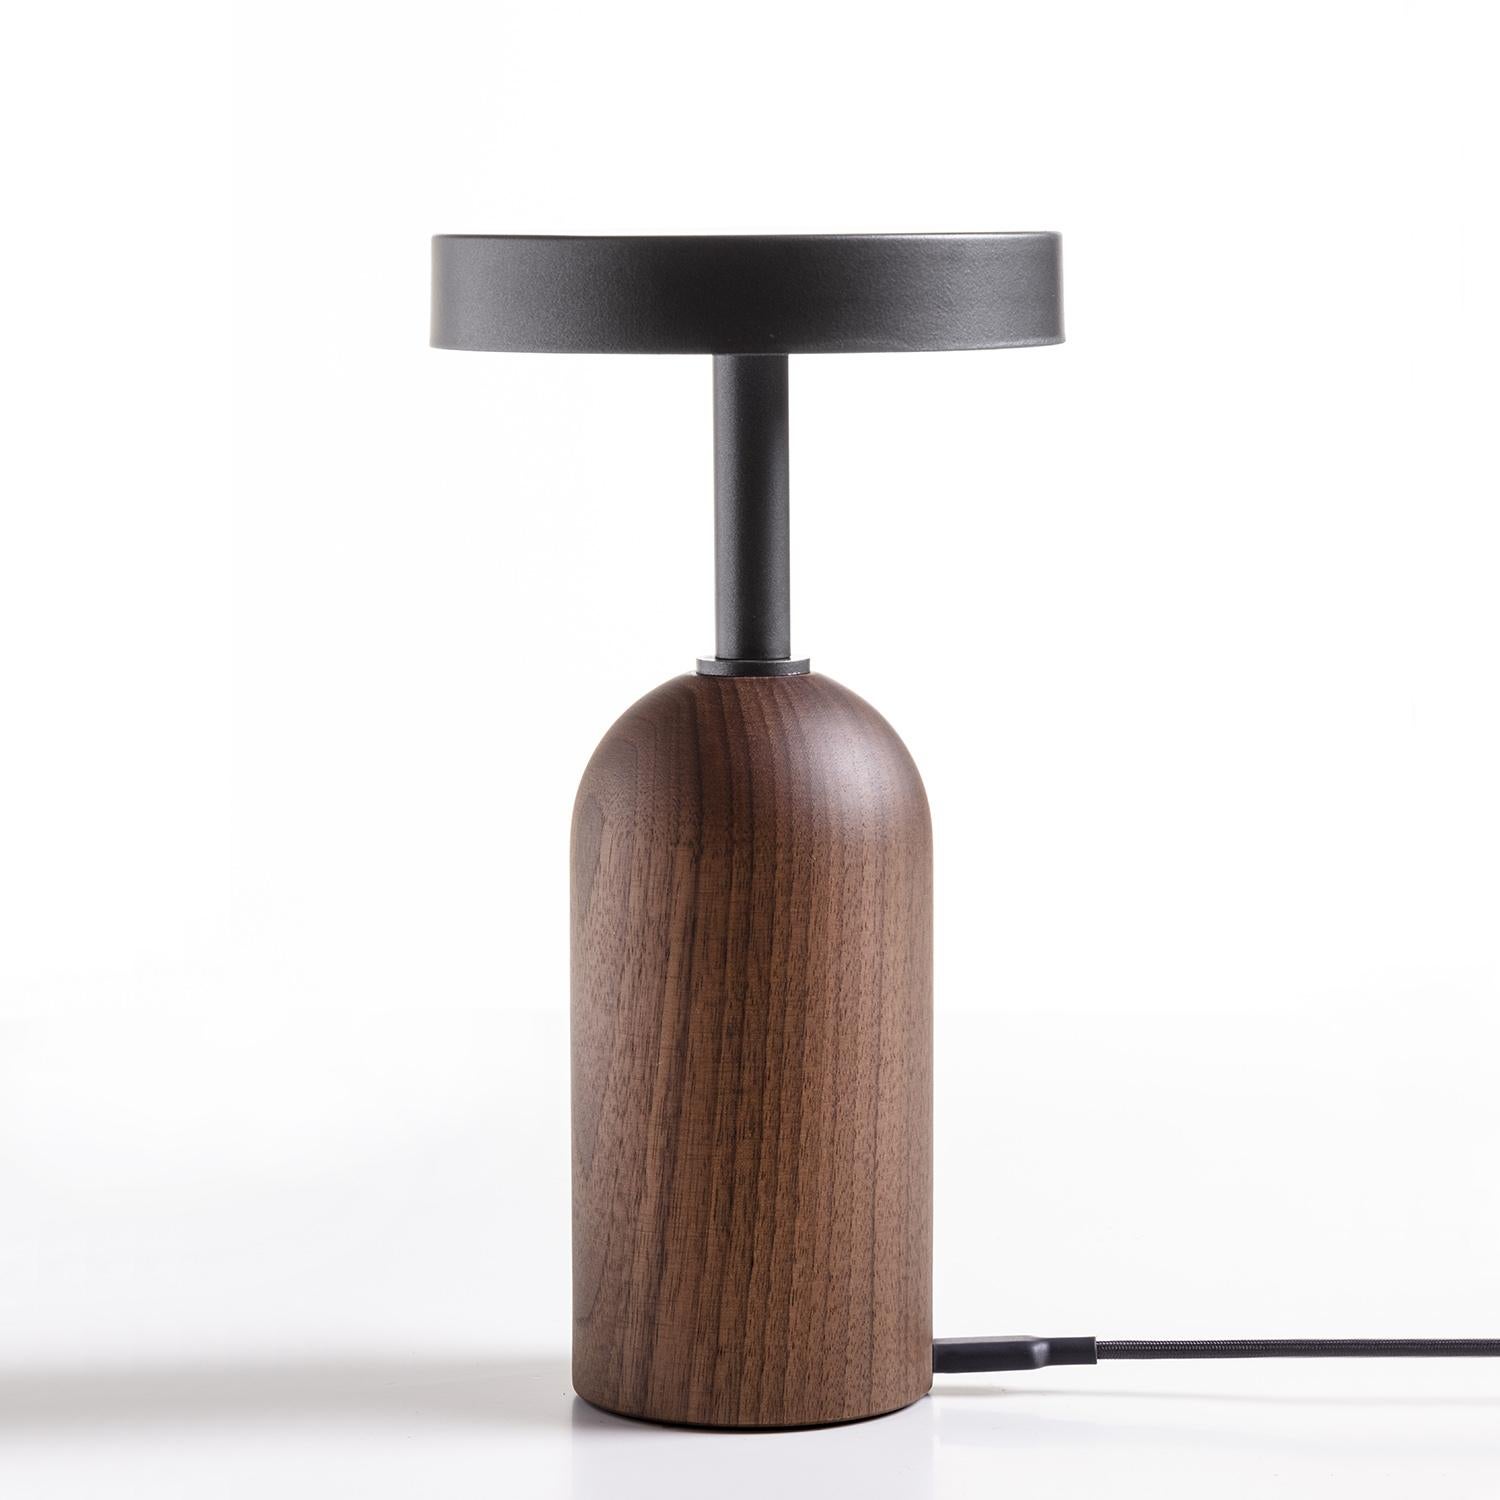 Table Lamp Stelle Light with base in solid walnut wood and with 
metal top in iron grey finish. Dimmable LED light wireless table lamp,
with switch mechanism with touch pad at the top of the diffuser, with
methacrylate diffuser. Includeing USB-C